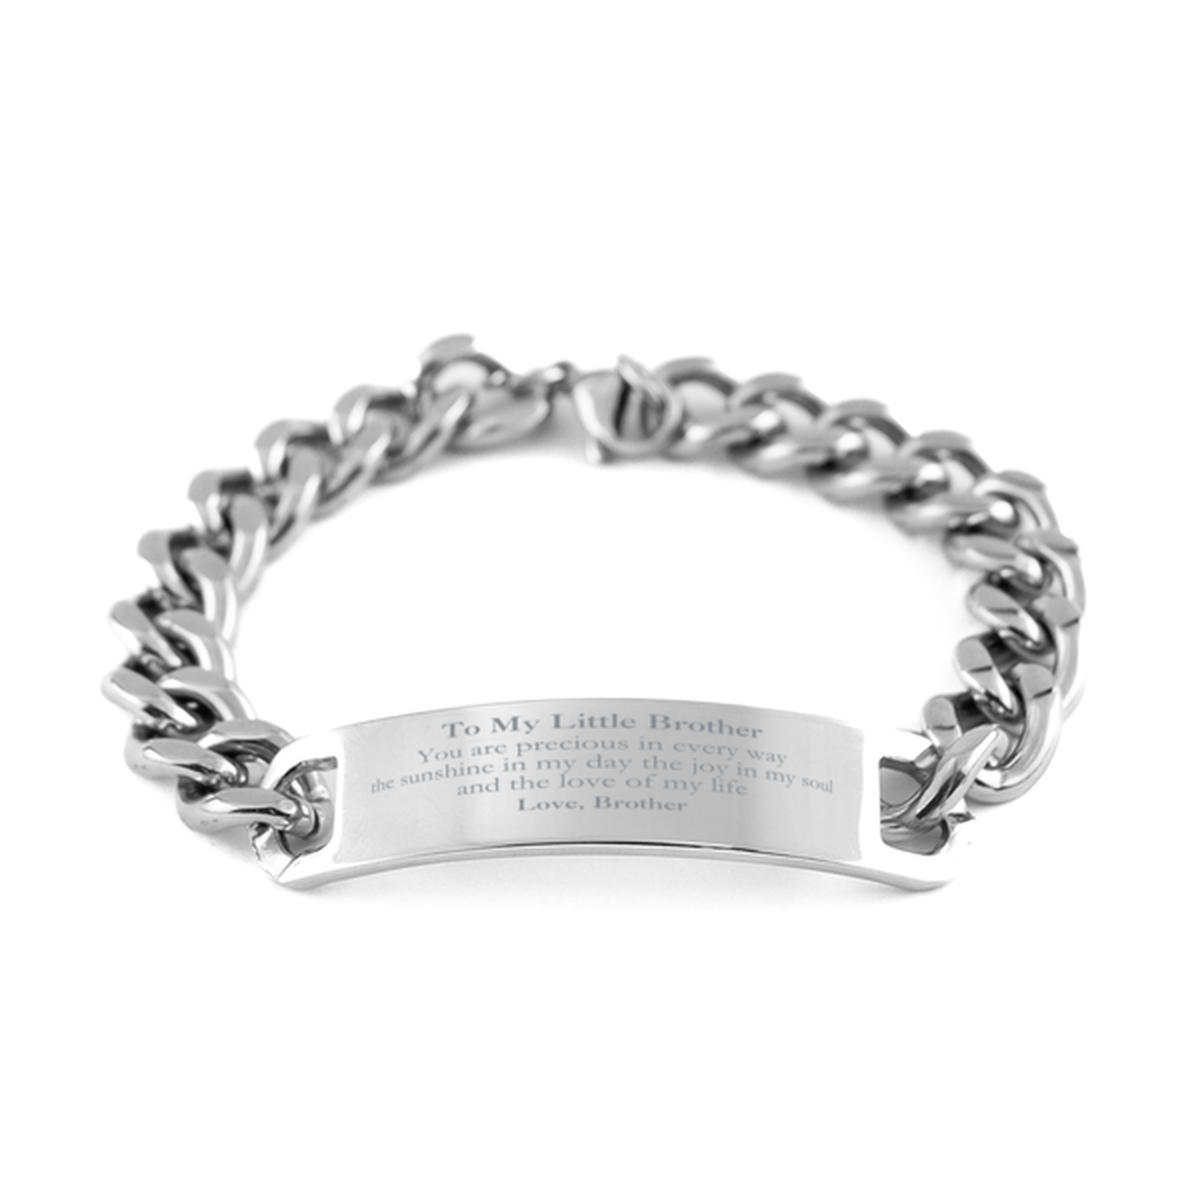 Graduation Gifts for Little Brother Cuban Chain Stainless Steel Bracelet Present from Brother, Christmas Little Brother Birthday Gifts Little Brother You are precious in every way the sunshine in my day. Love, Brother